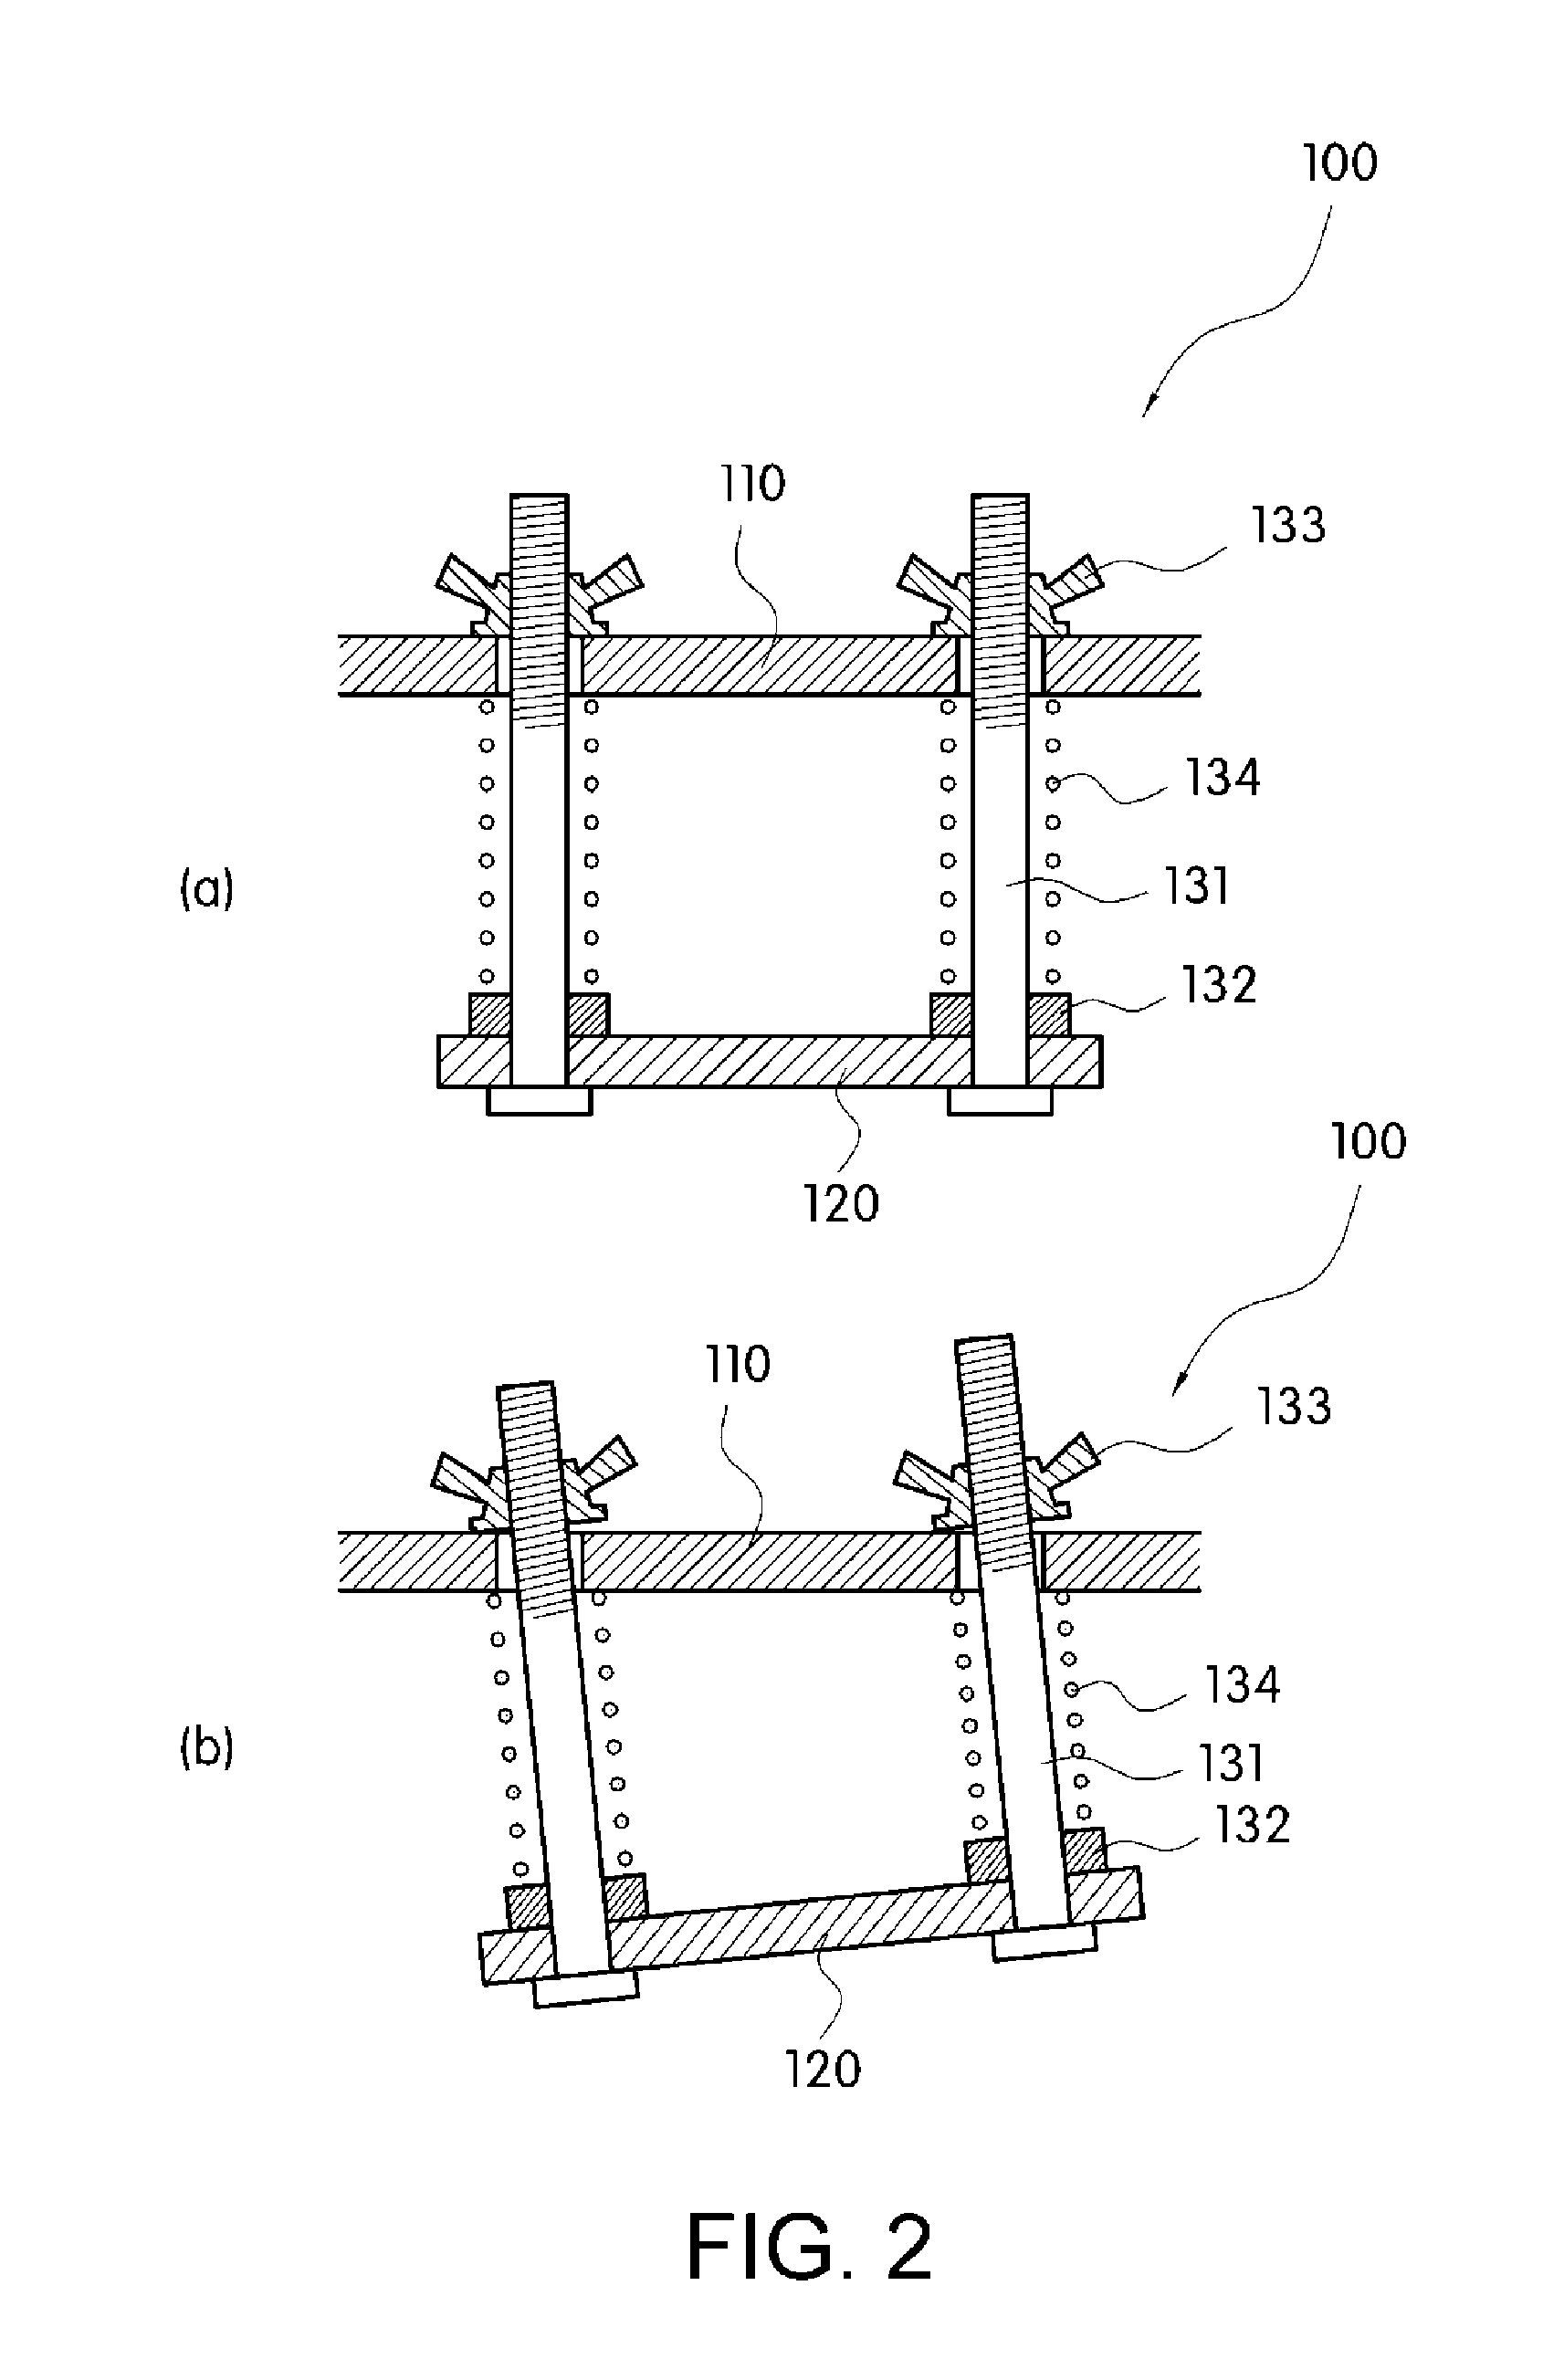 Pixel mirror-type reflection mirror for natural lighting device